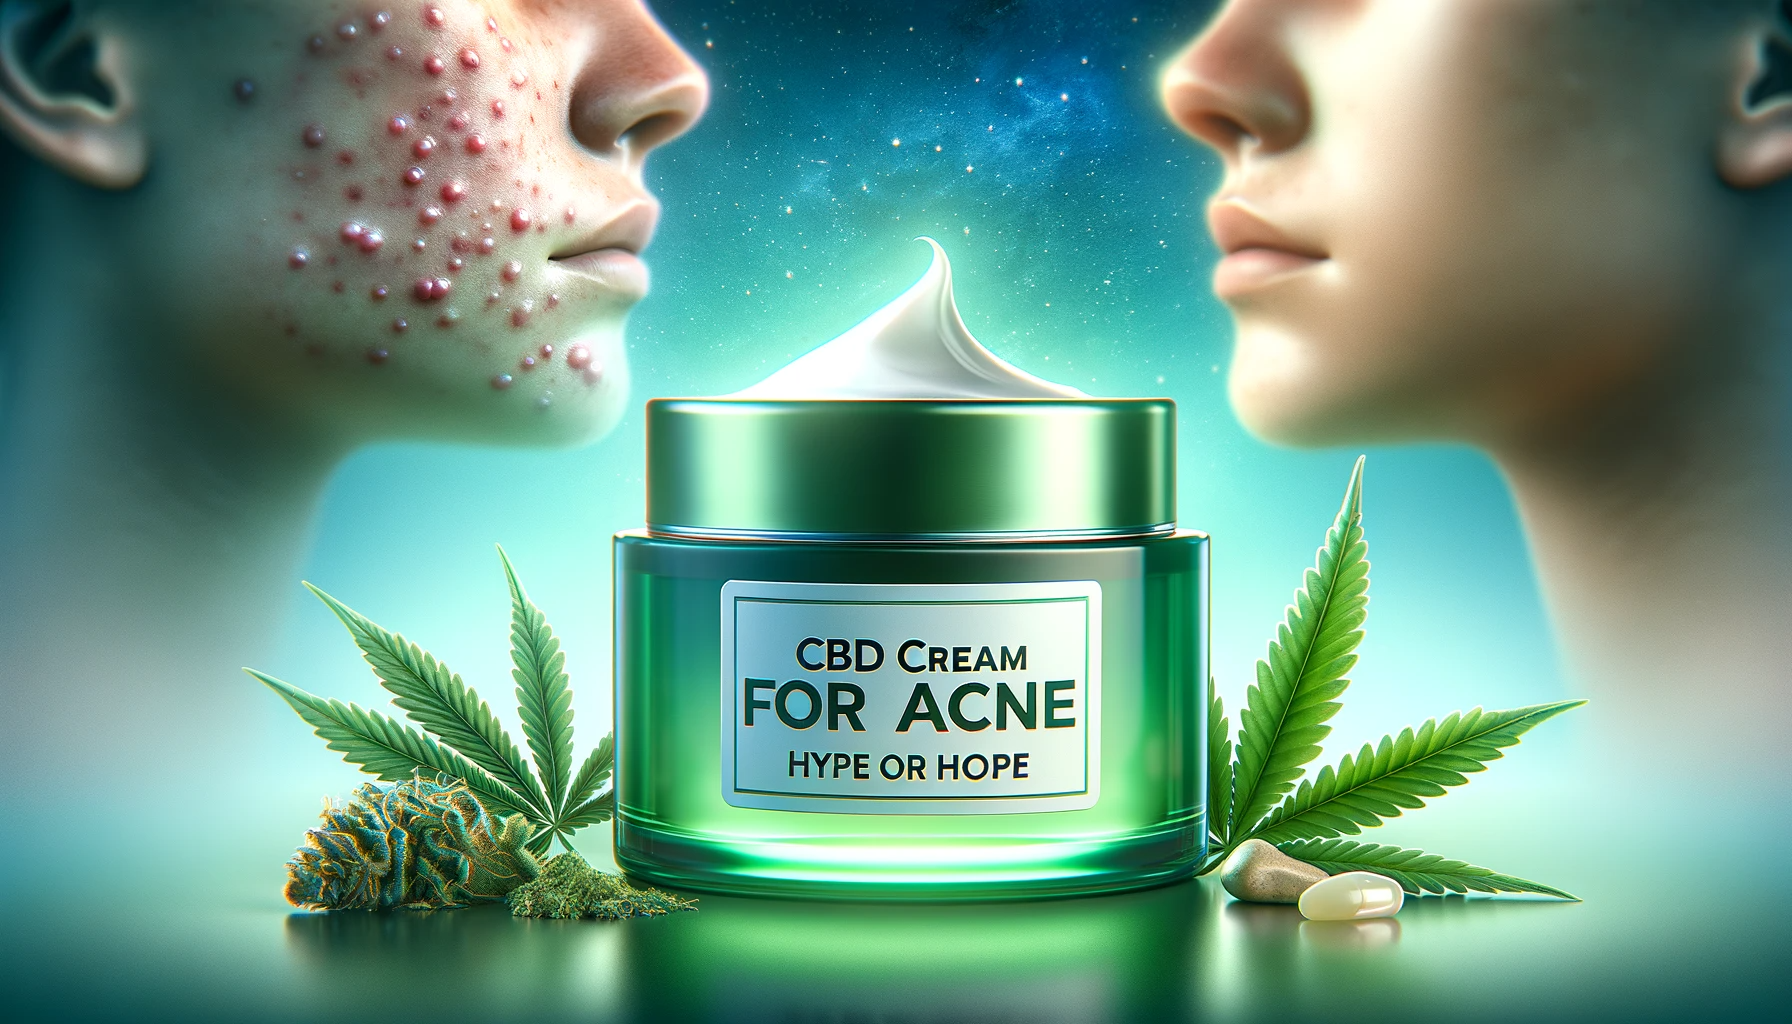 featured image for a blog post titled 'CBD Creams for Acne_ Hype or Hope_'. The image should showcase a very realistic